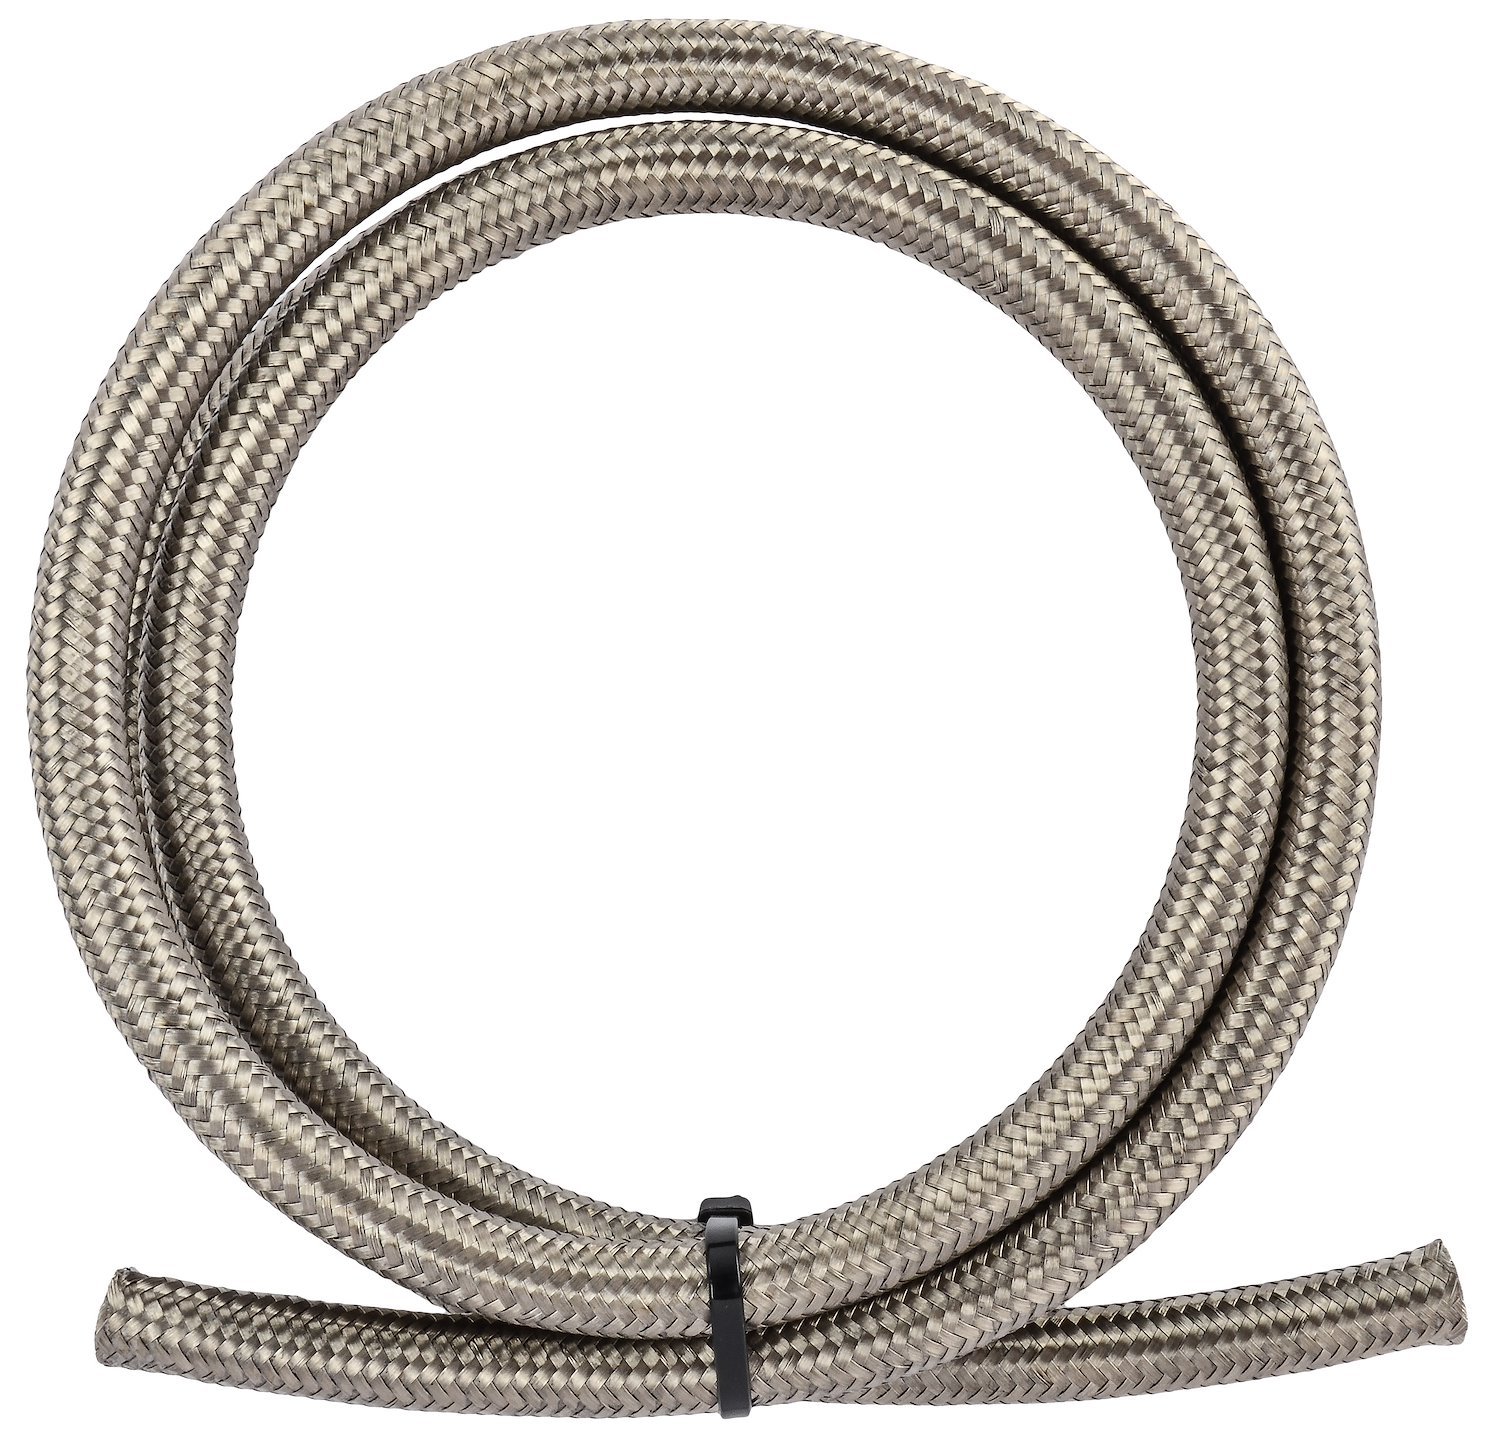 Pro-Flo 200 Series Stainless Steel Braided Hose -6